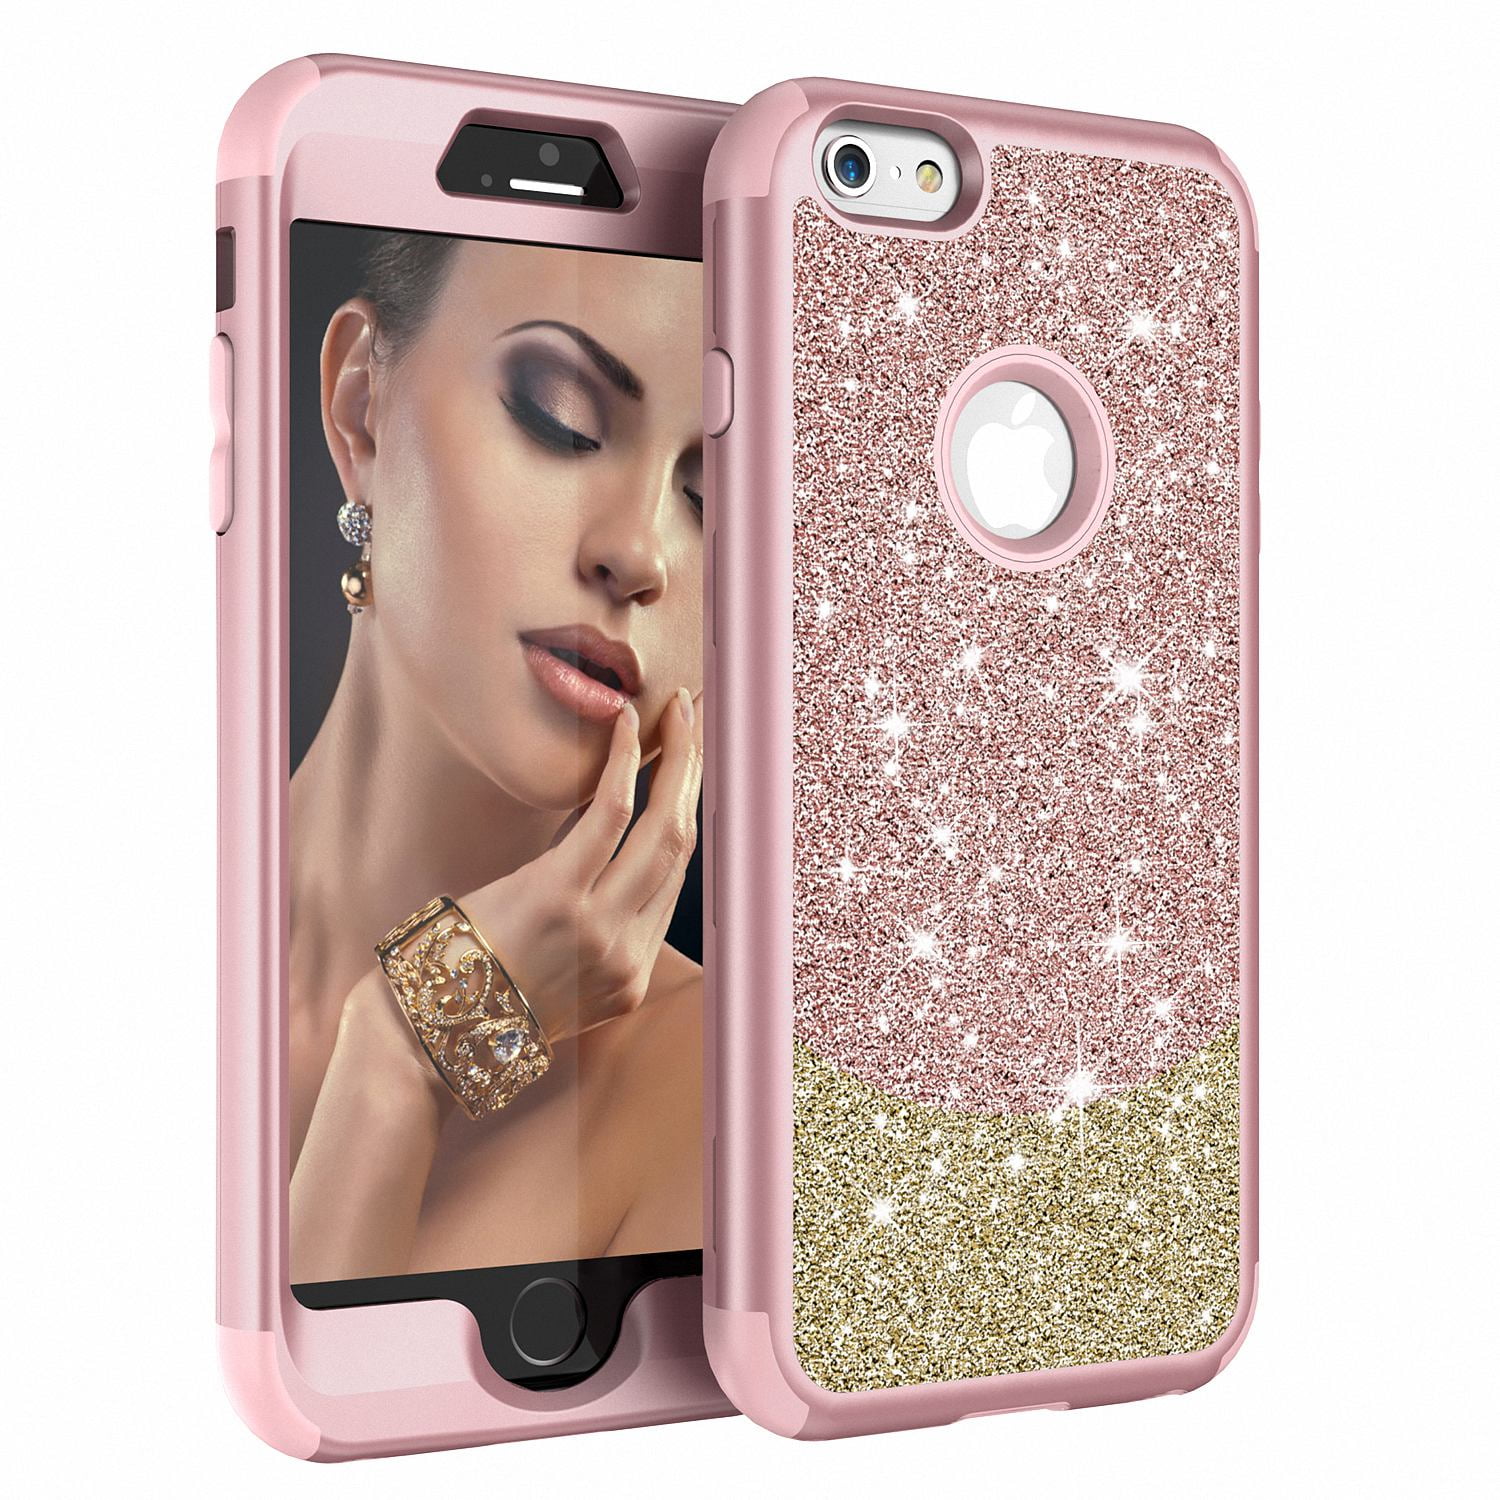 iPhone 6S Plus / 6 Plus Cover, Allytech 3 In 1 Silicone PC Glitter Shockproof Lightweight Armor Defender Bumper Full Body Protective Case Cover for Apple iPhone 6S Plus, iPhone 6